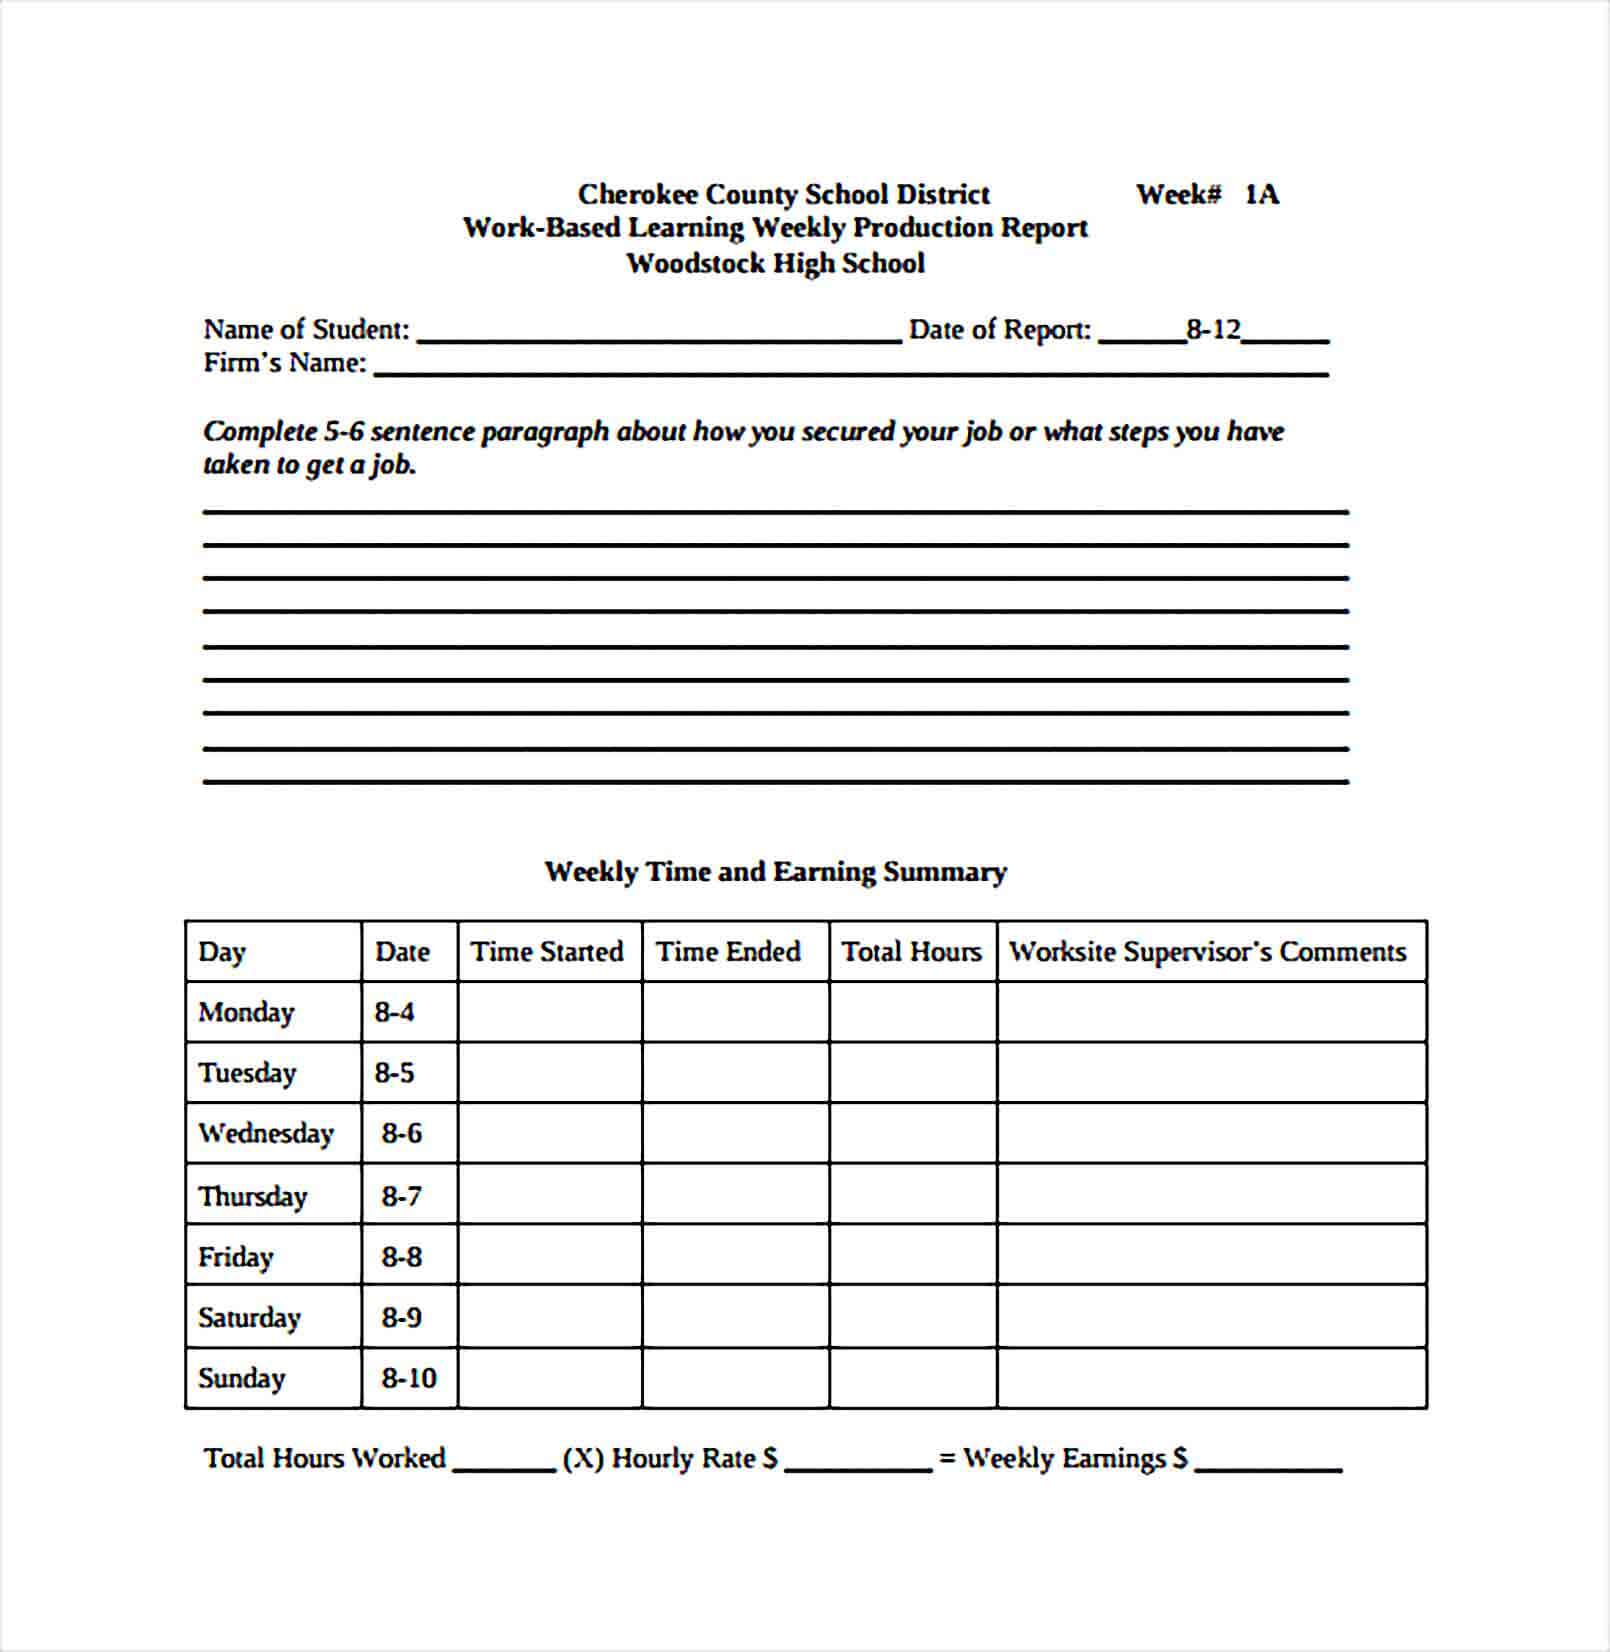 Sample Weekly Production Report PDF Template